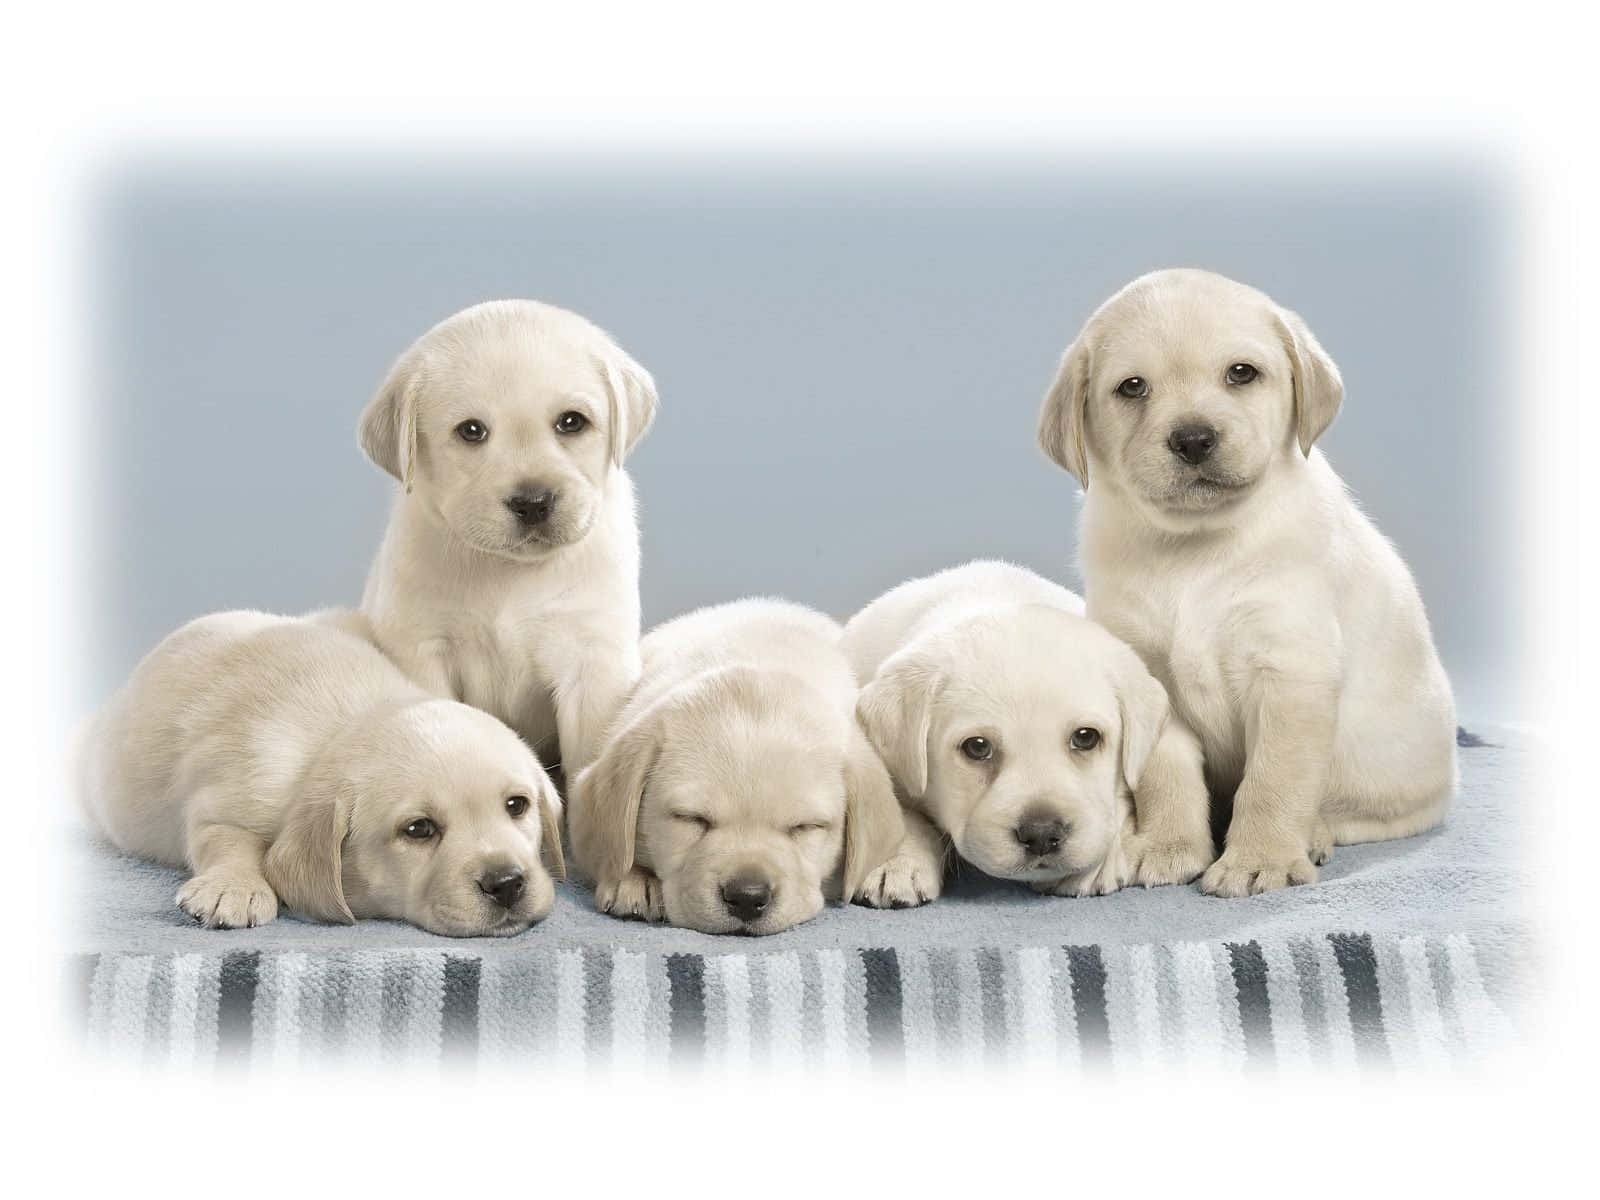 Four Adorable And Cuddly Puppies Snuggling Wallpaper